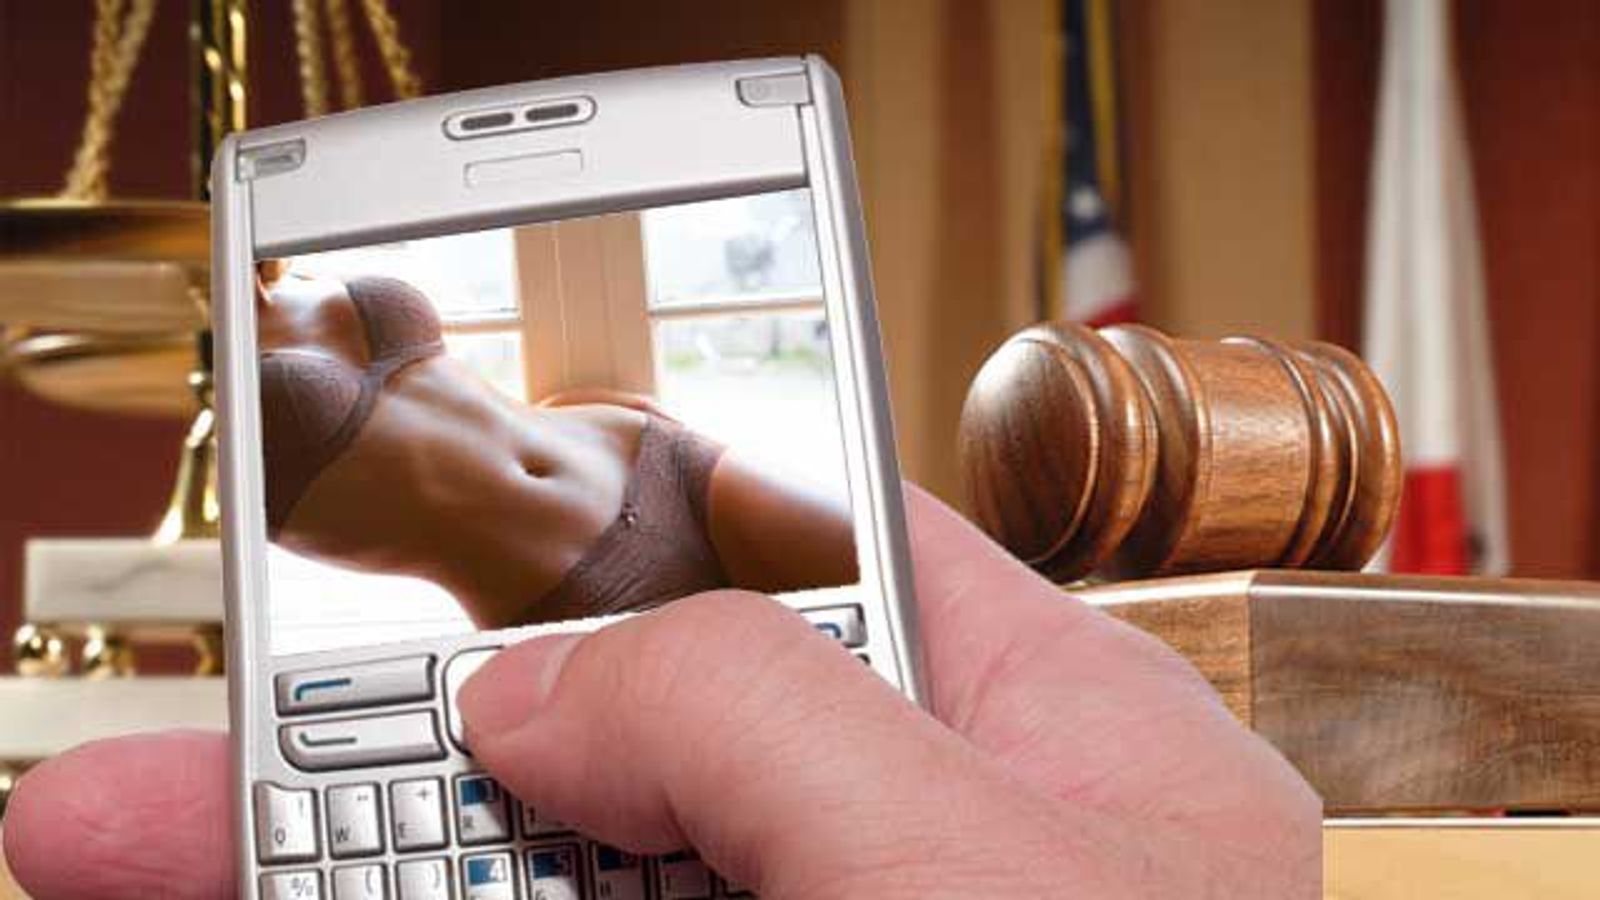 Recent Sexting Case Points Up Problems in Age-Based Sex Laws